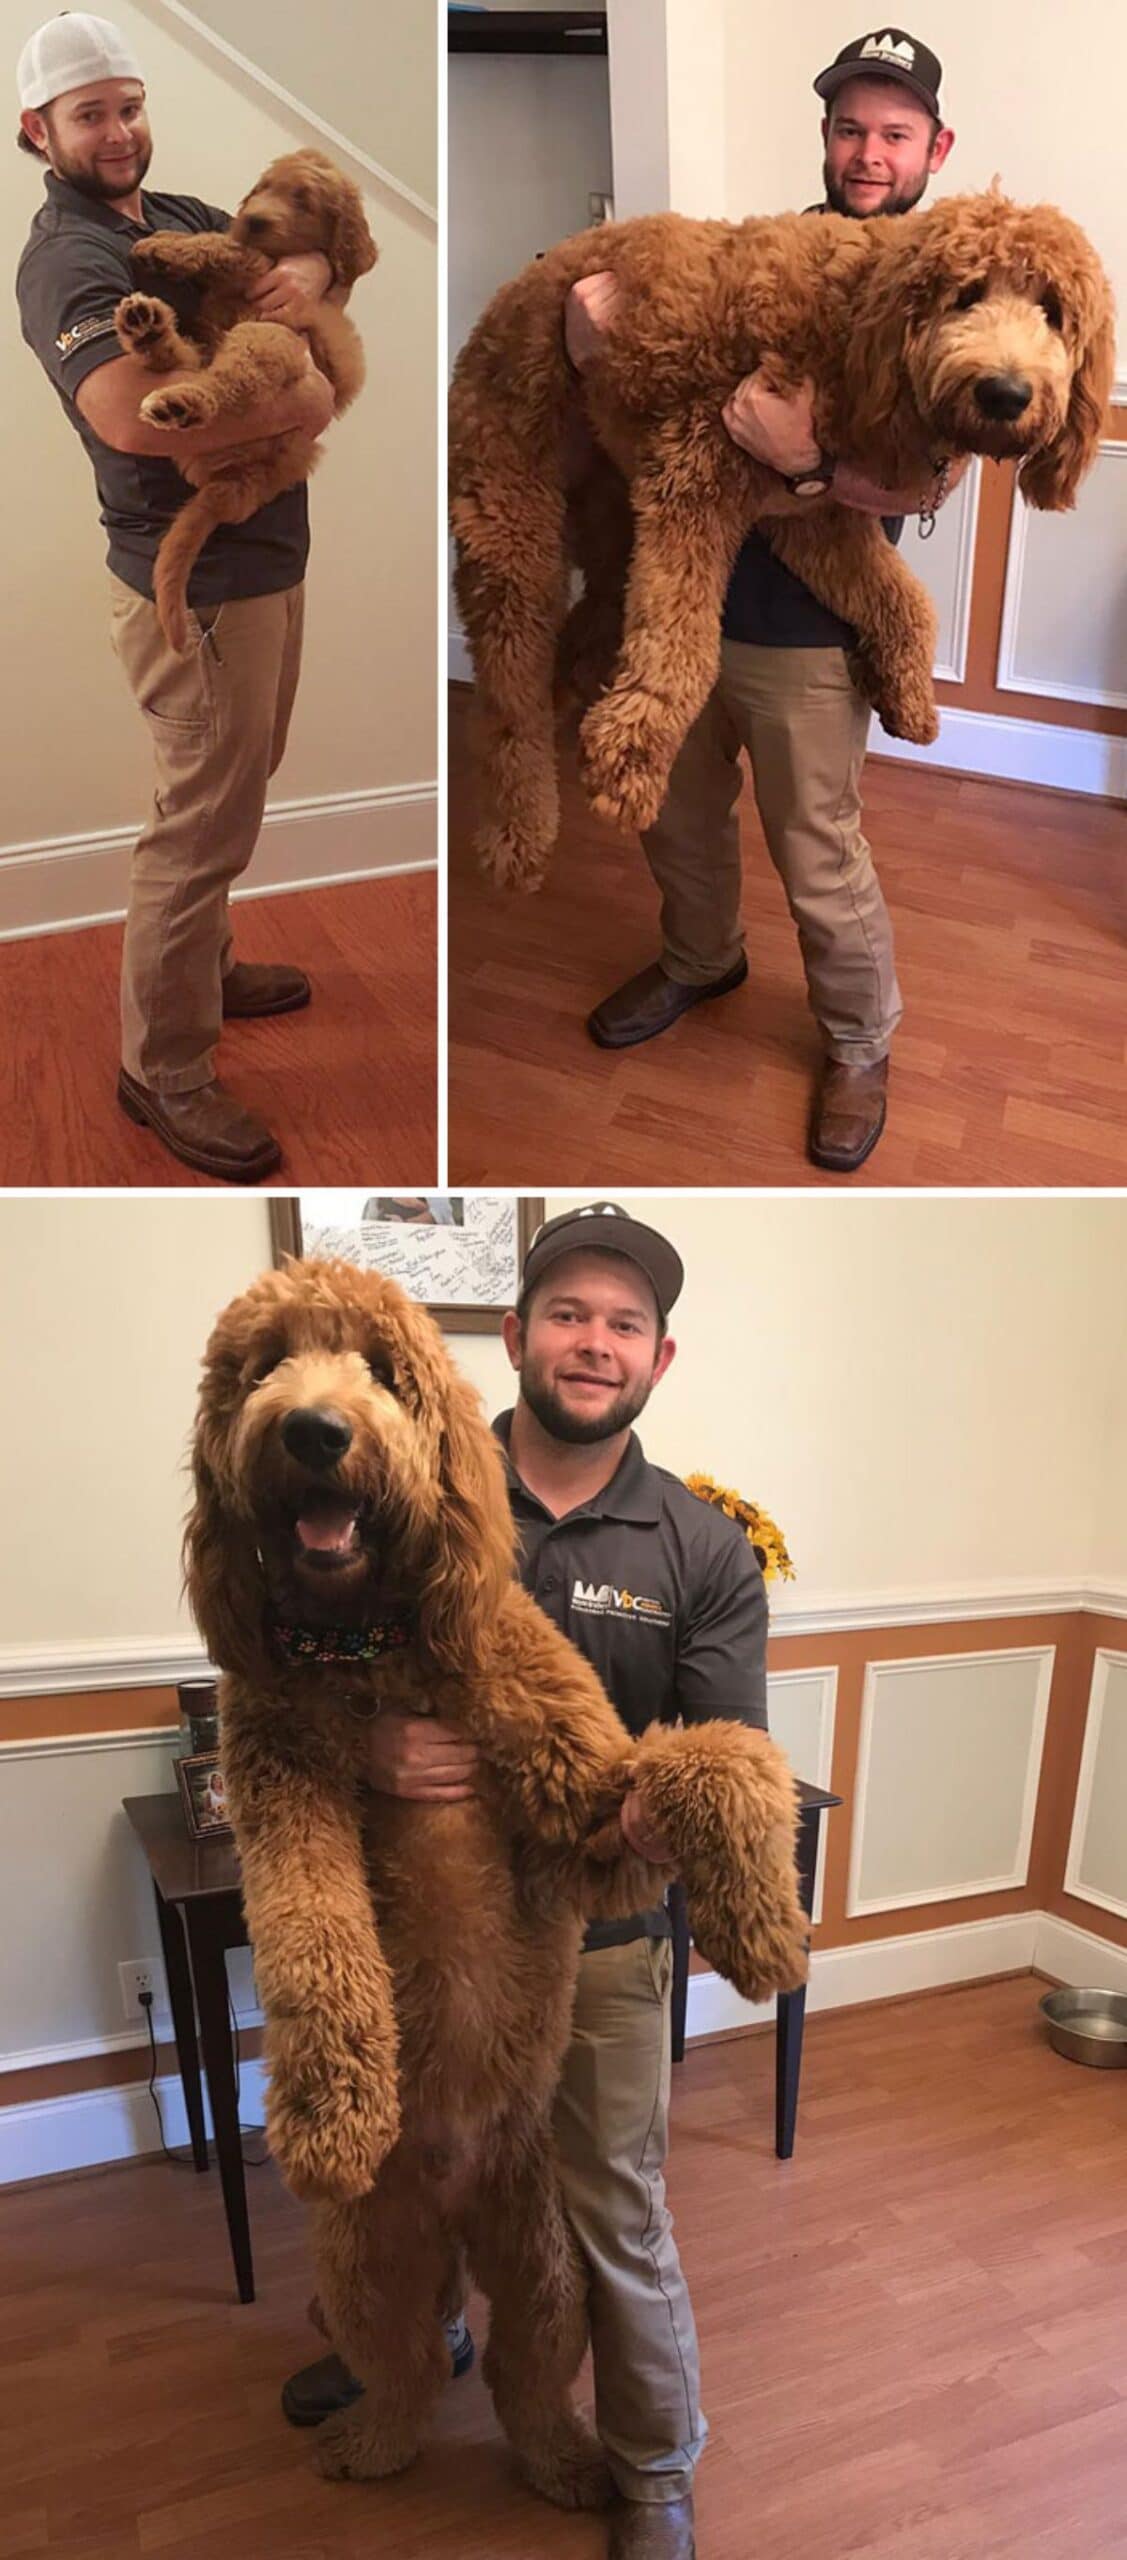 1 photo of a man holding a baby goldendoodle and 2 photos of him holding an adult goldendoodle